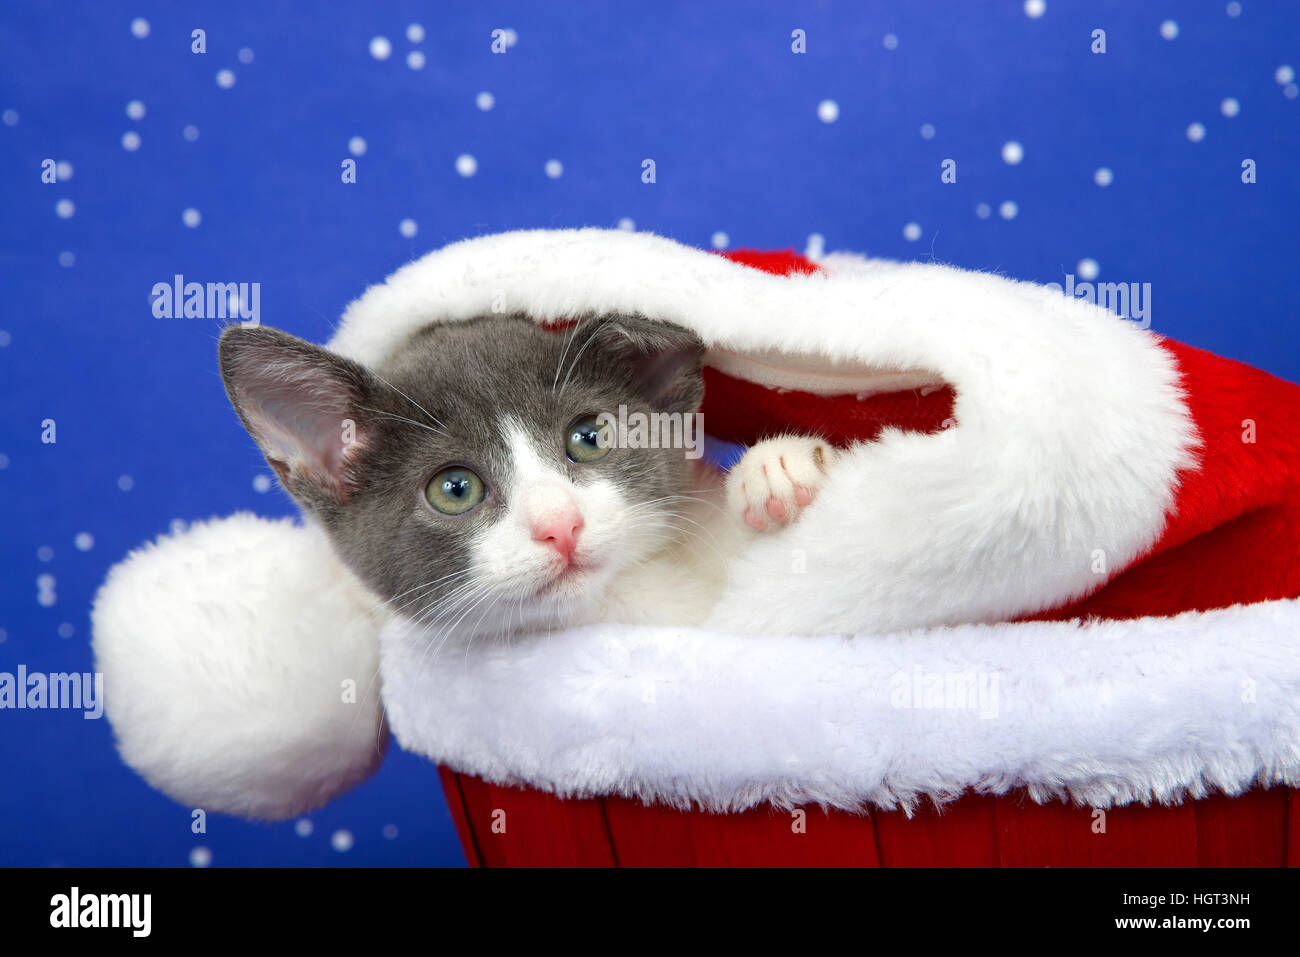 Tabby kitten gray and white peaking out of red velvet and white fur lined fabric in a fur lined basket, blue starry background. close up. Stock Photo